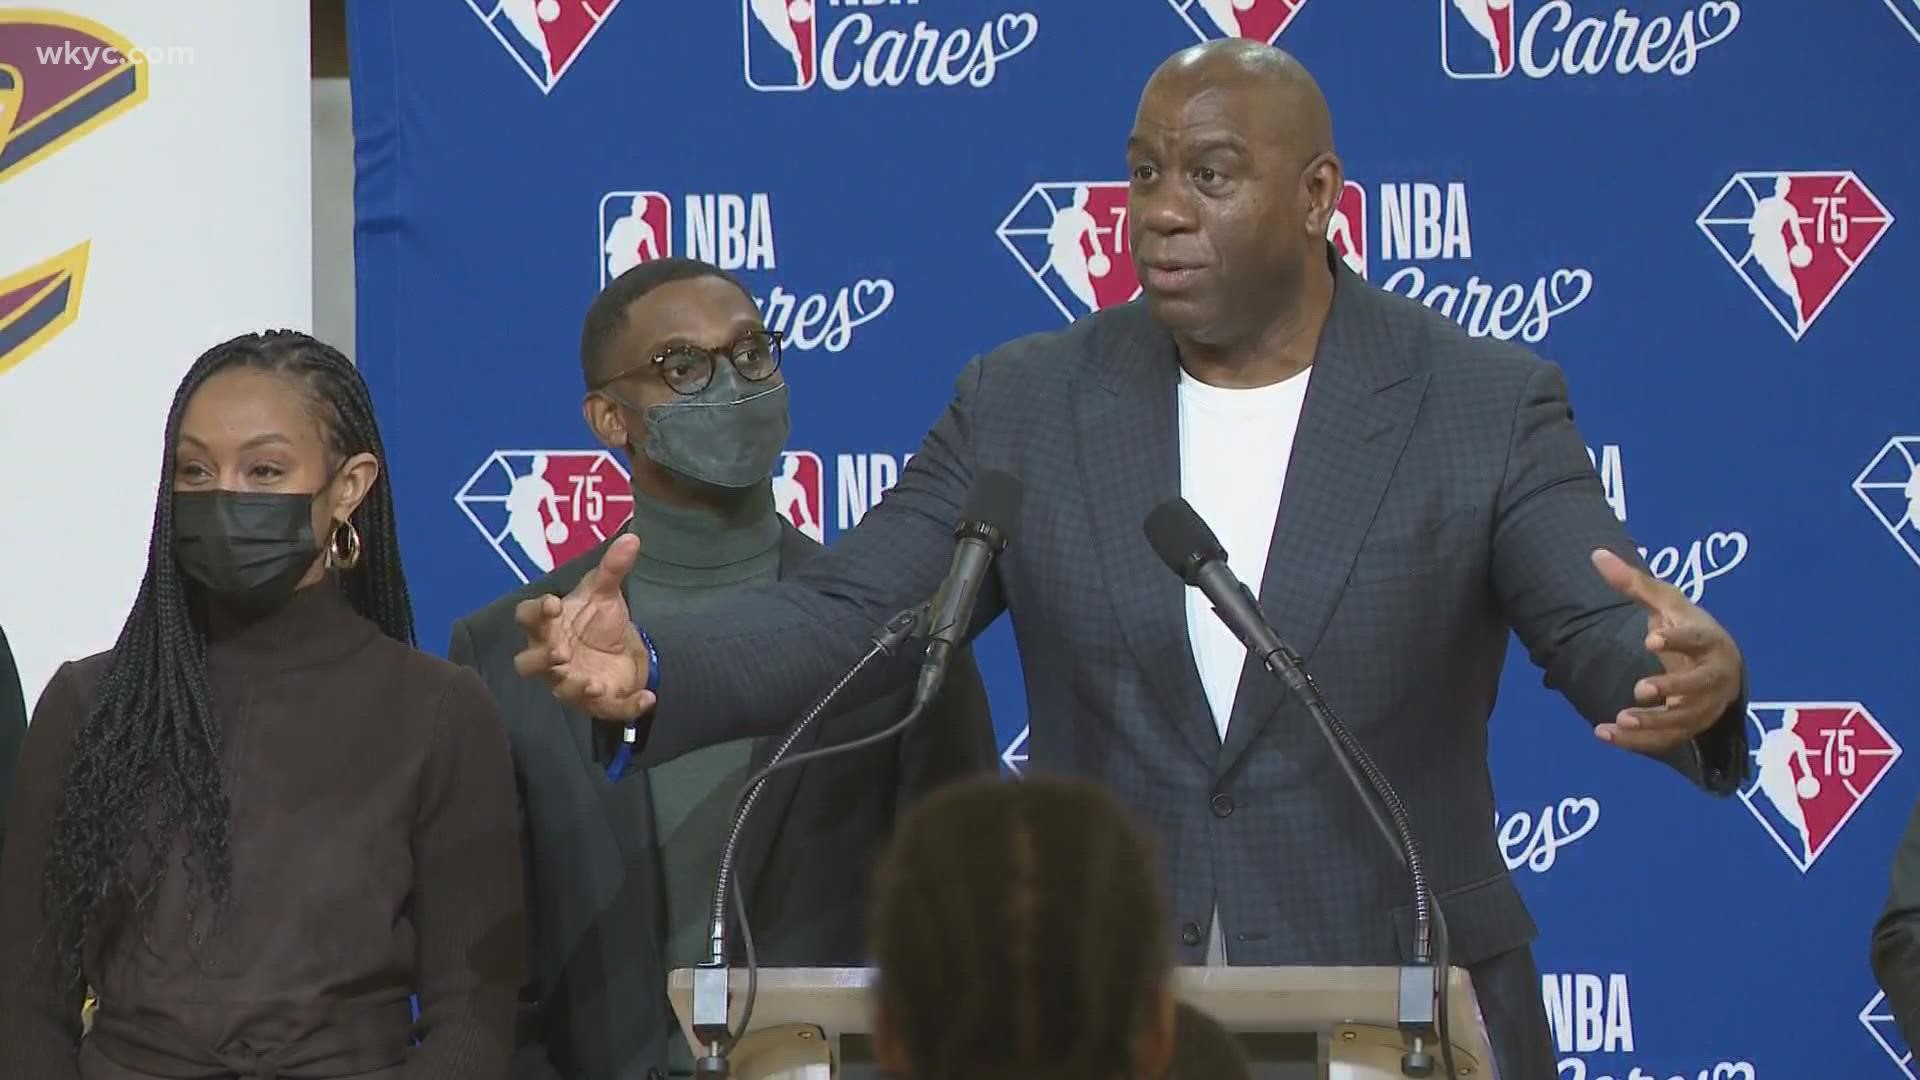 The NBA dedicated its 2,000th Live, Learn or Play center on Friday at Cudell Recreation Center in Cleveland. Magic Johnson was among the guest speakers.